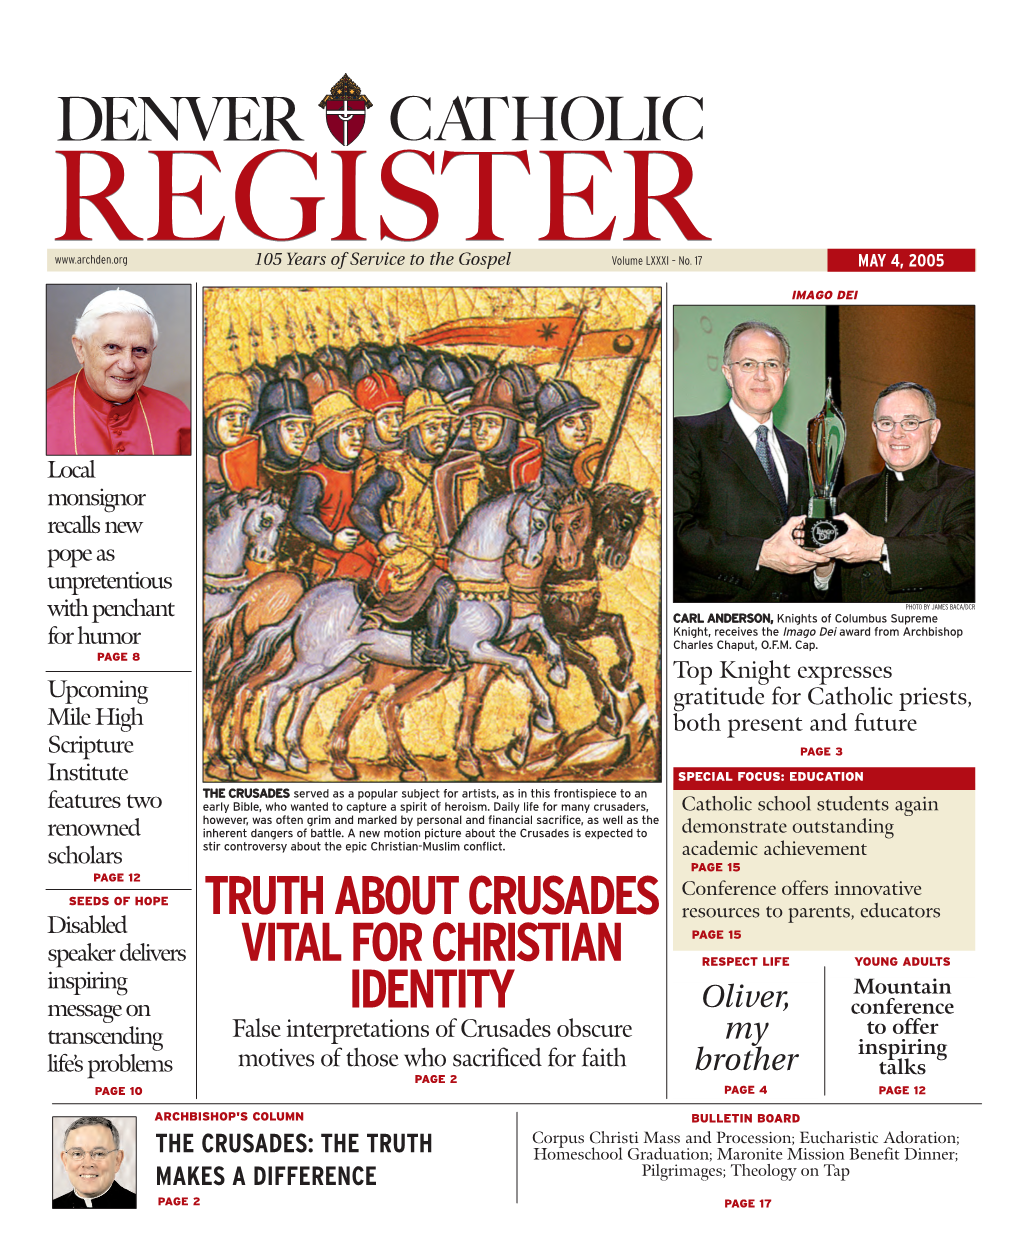 Truth About Crusades Vital for Christian Identity